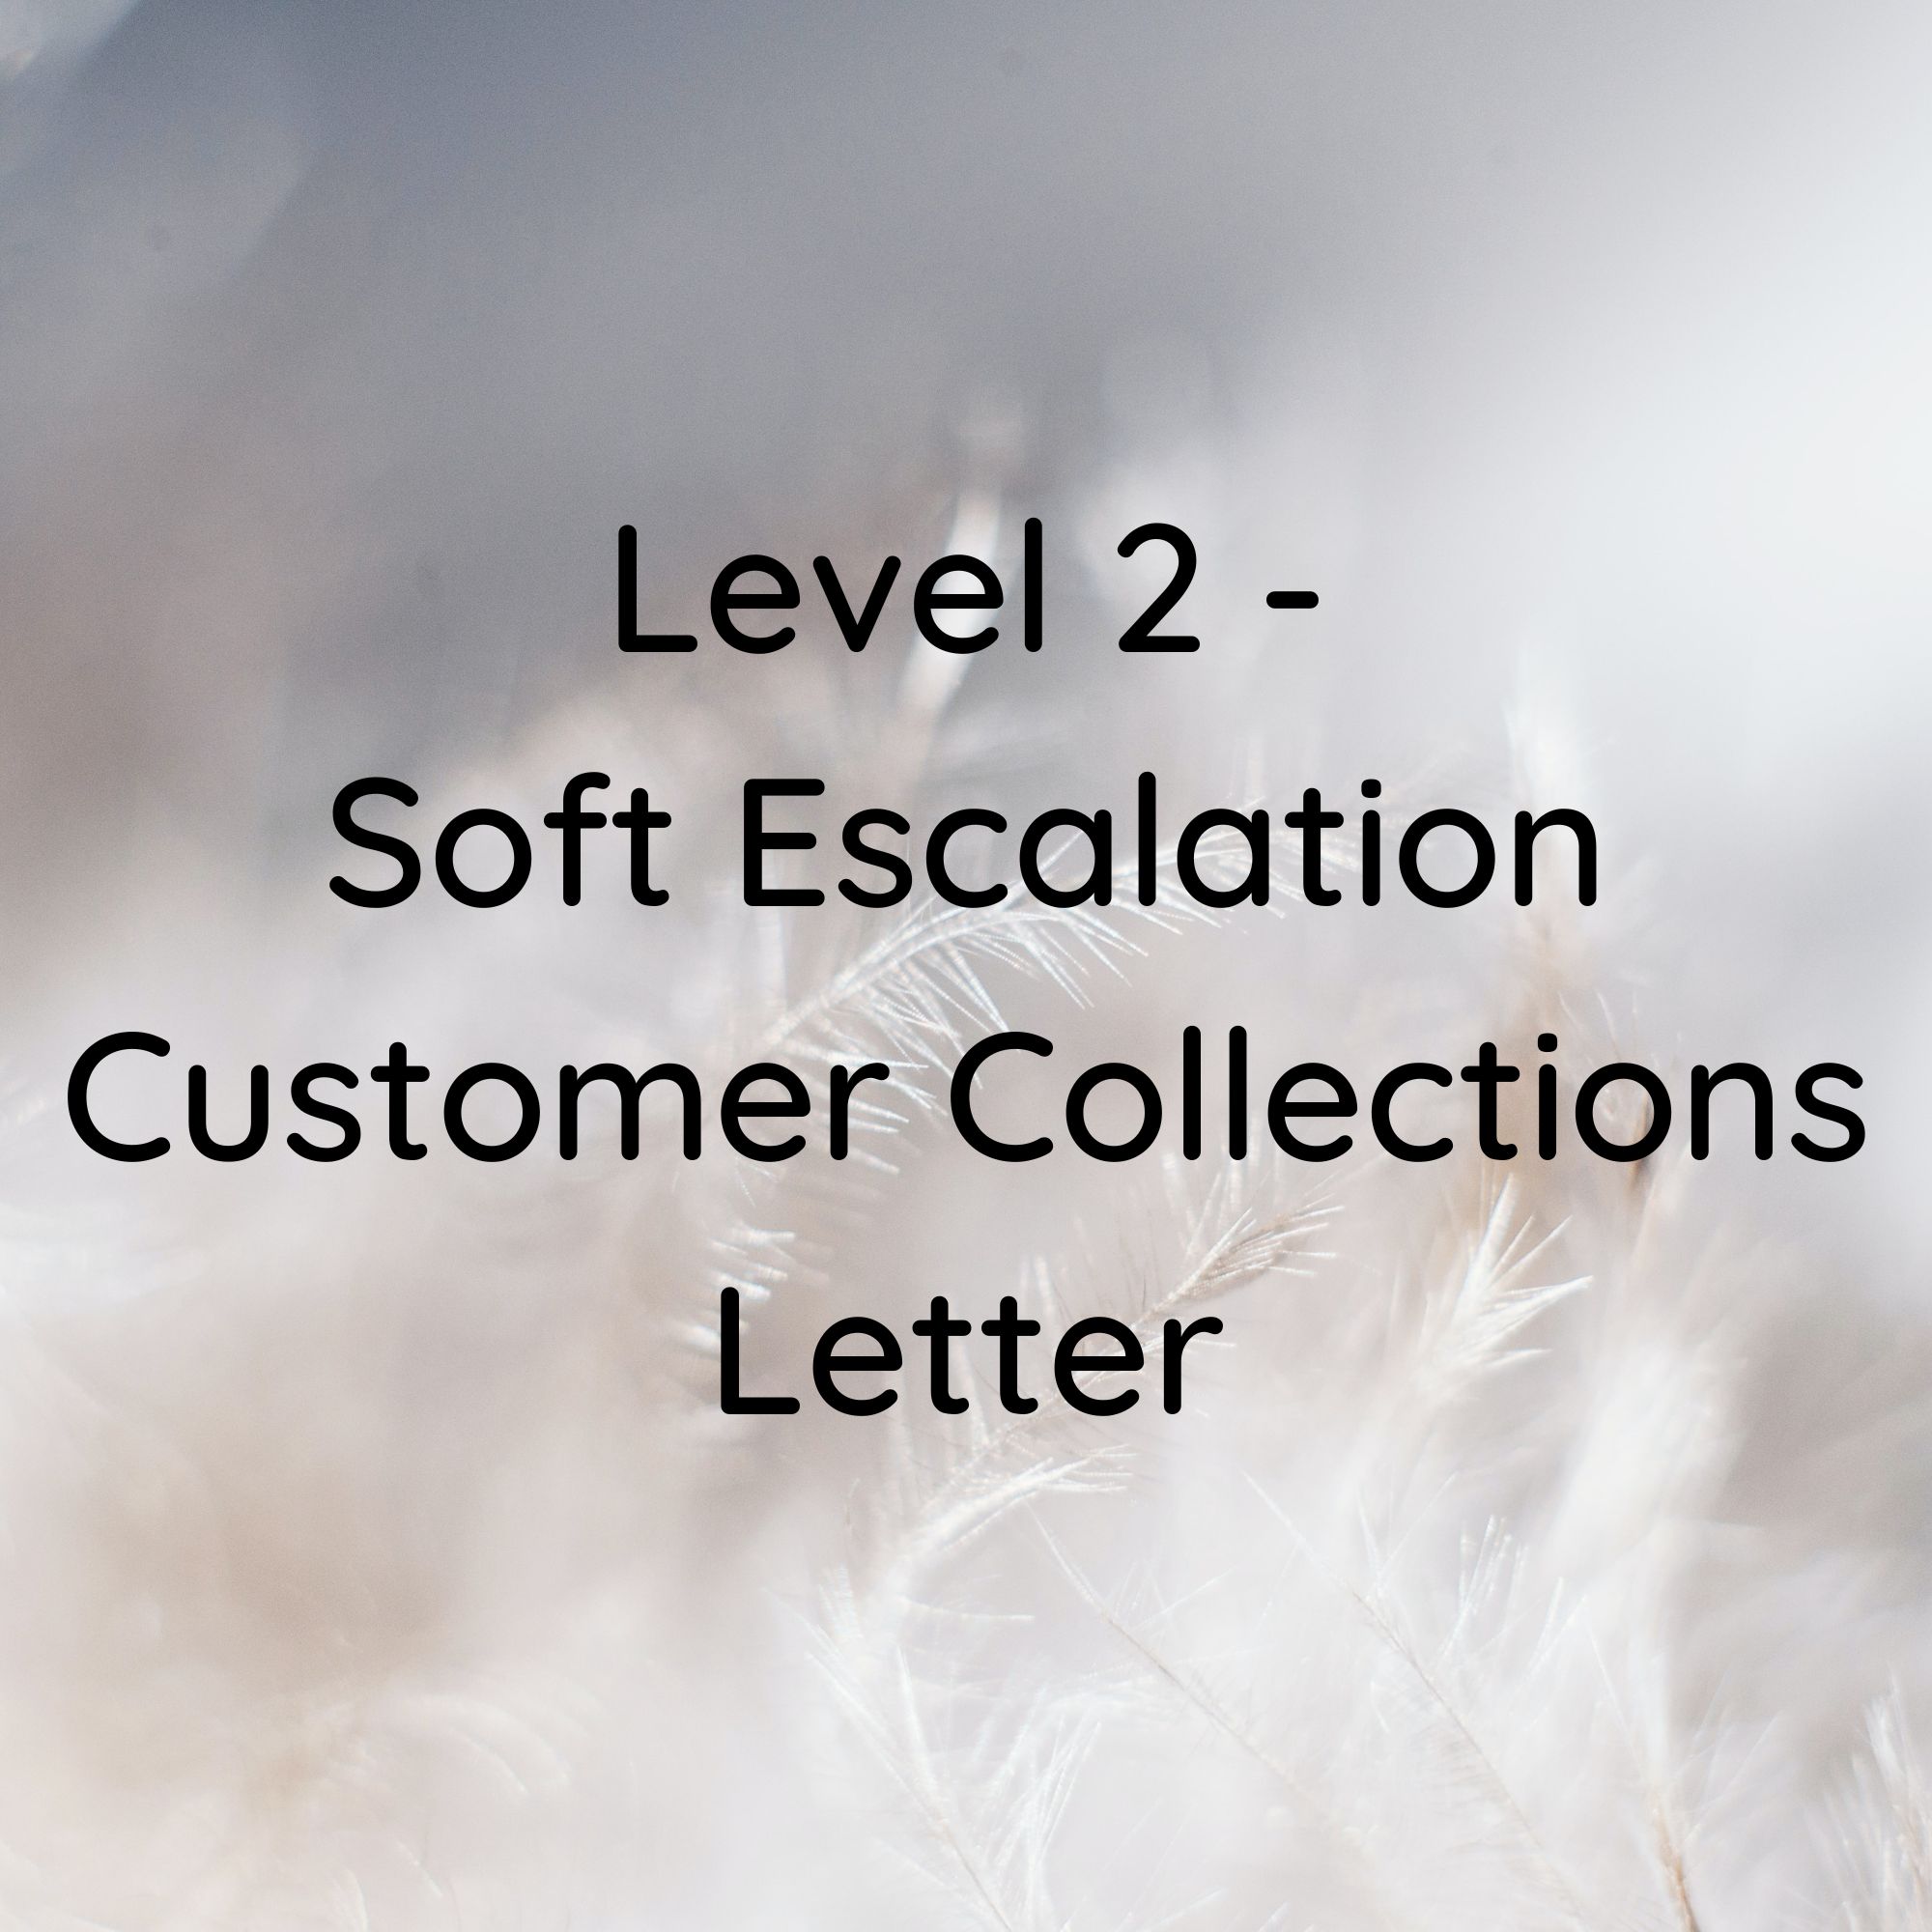 Level 2 - Soft Escalation Customer Collections Letter